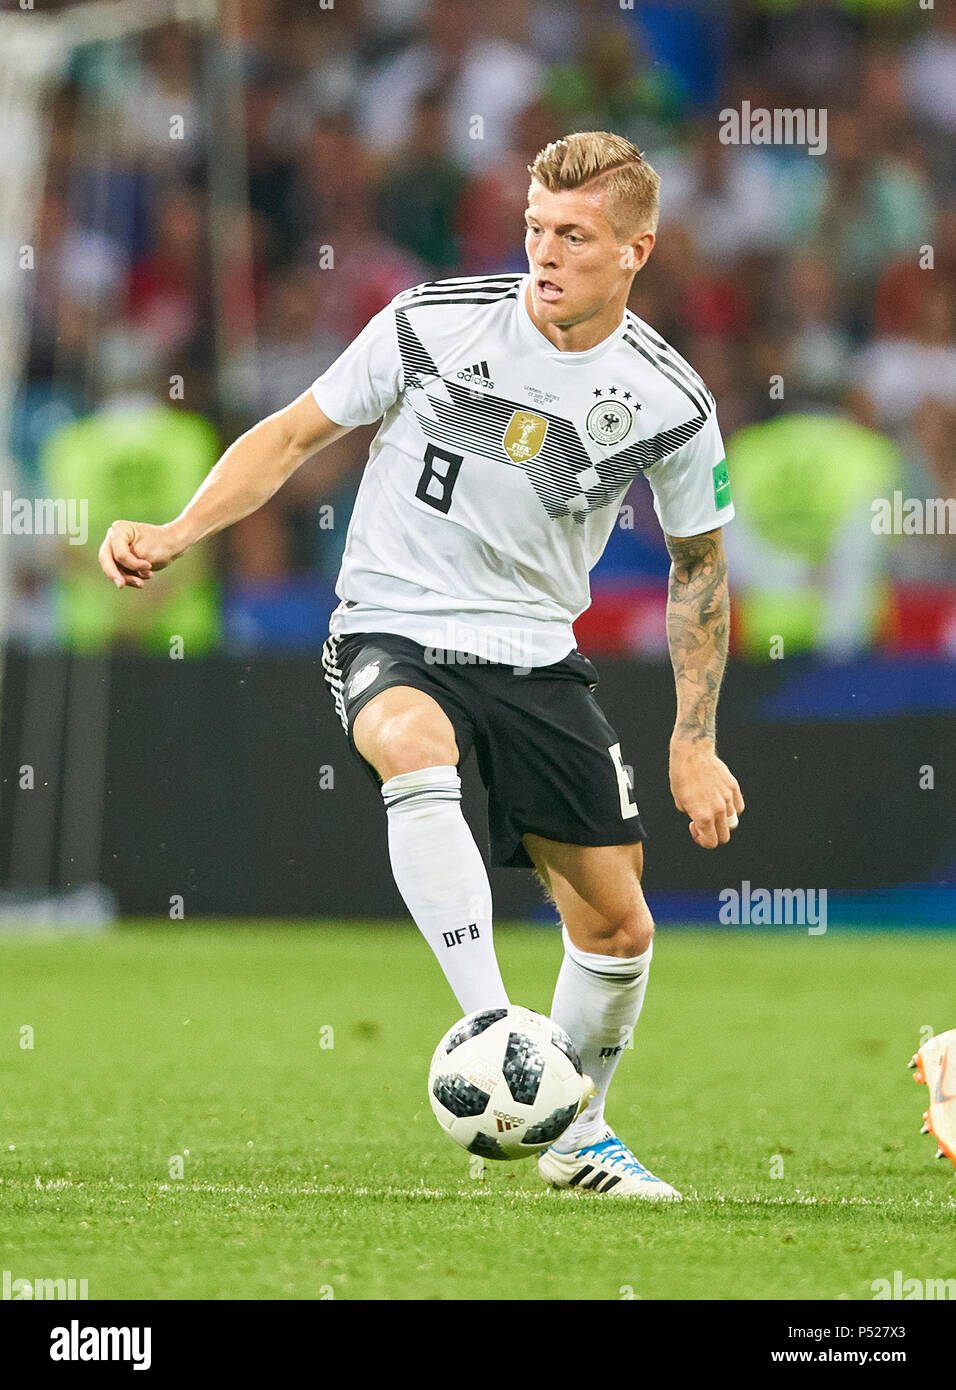 Germany - Sweden, Soccer, Sochi, June 23, 2018 Toni KROOS, DFB 8   GERMANY - SWEDEN 2-1 FIFA WORLD CUP 2018 RUSSIA, Group F, Season 2018/2019,  June 23, 2018  Fisht Olympic Stadium in Sotchi, Russia.  © Peter Schatz / Alamy Live News Stock Photo